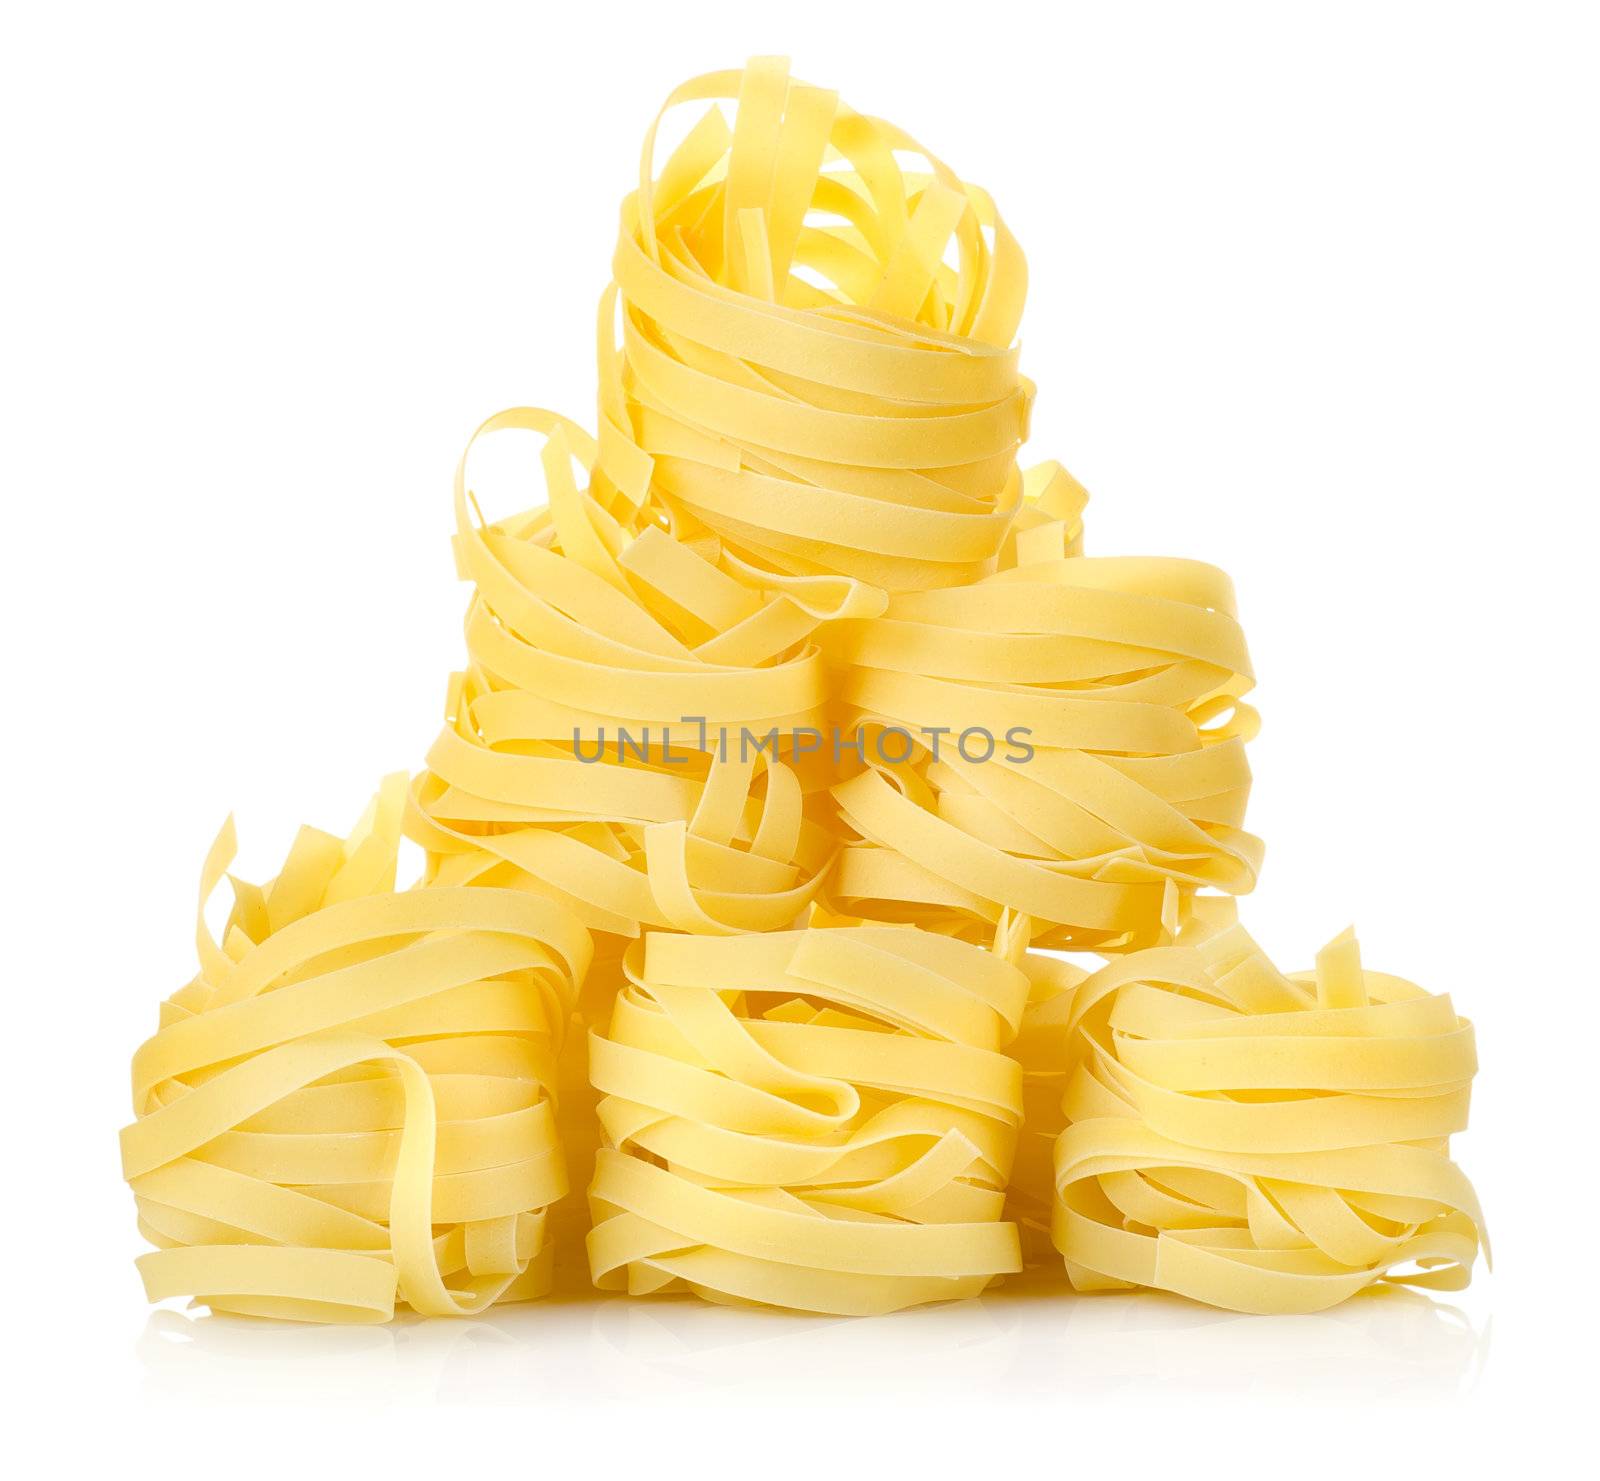 Pile of pasta tagliatelle isolated on white background